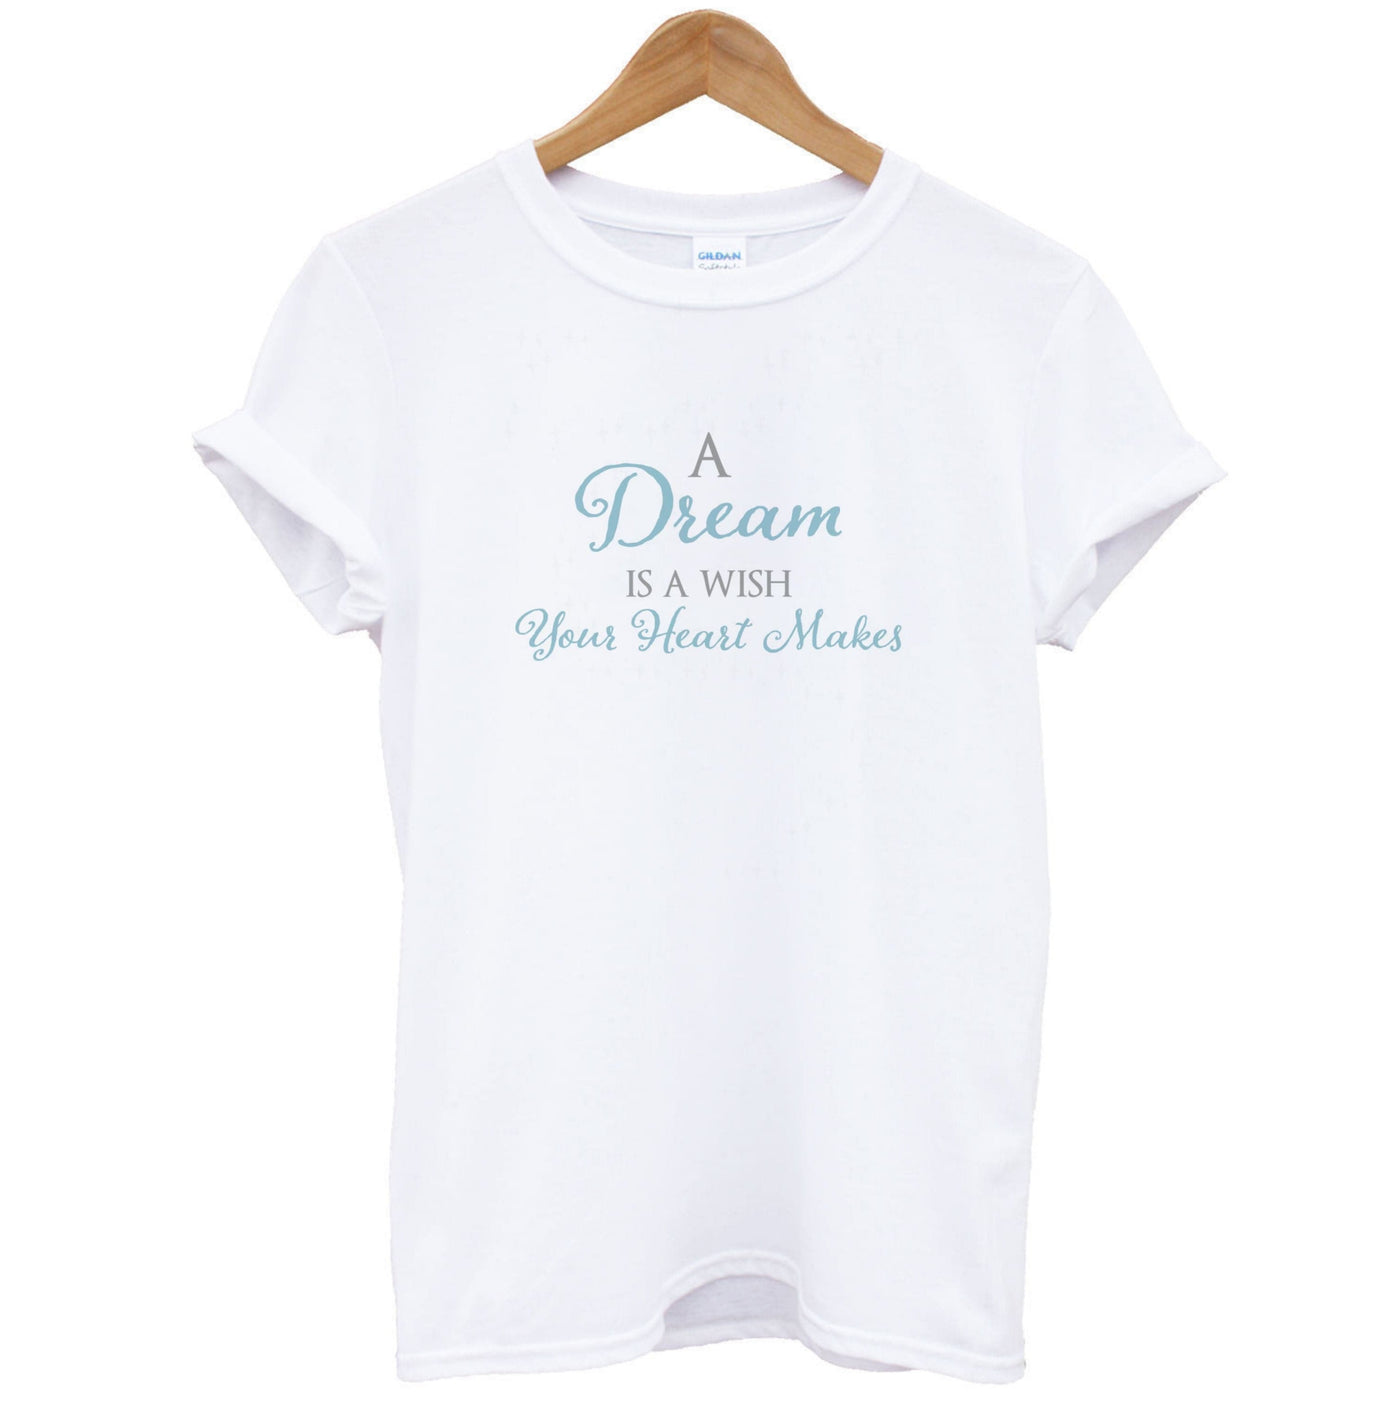 A Dream Is A Wish Your Heart Makes - Disney T-Shirt